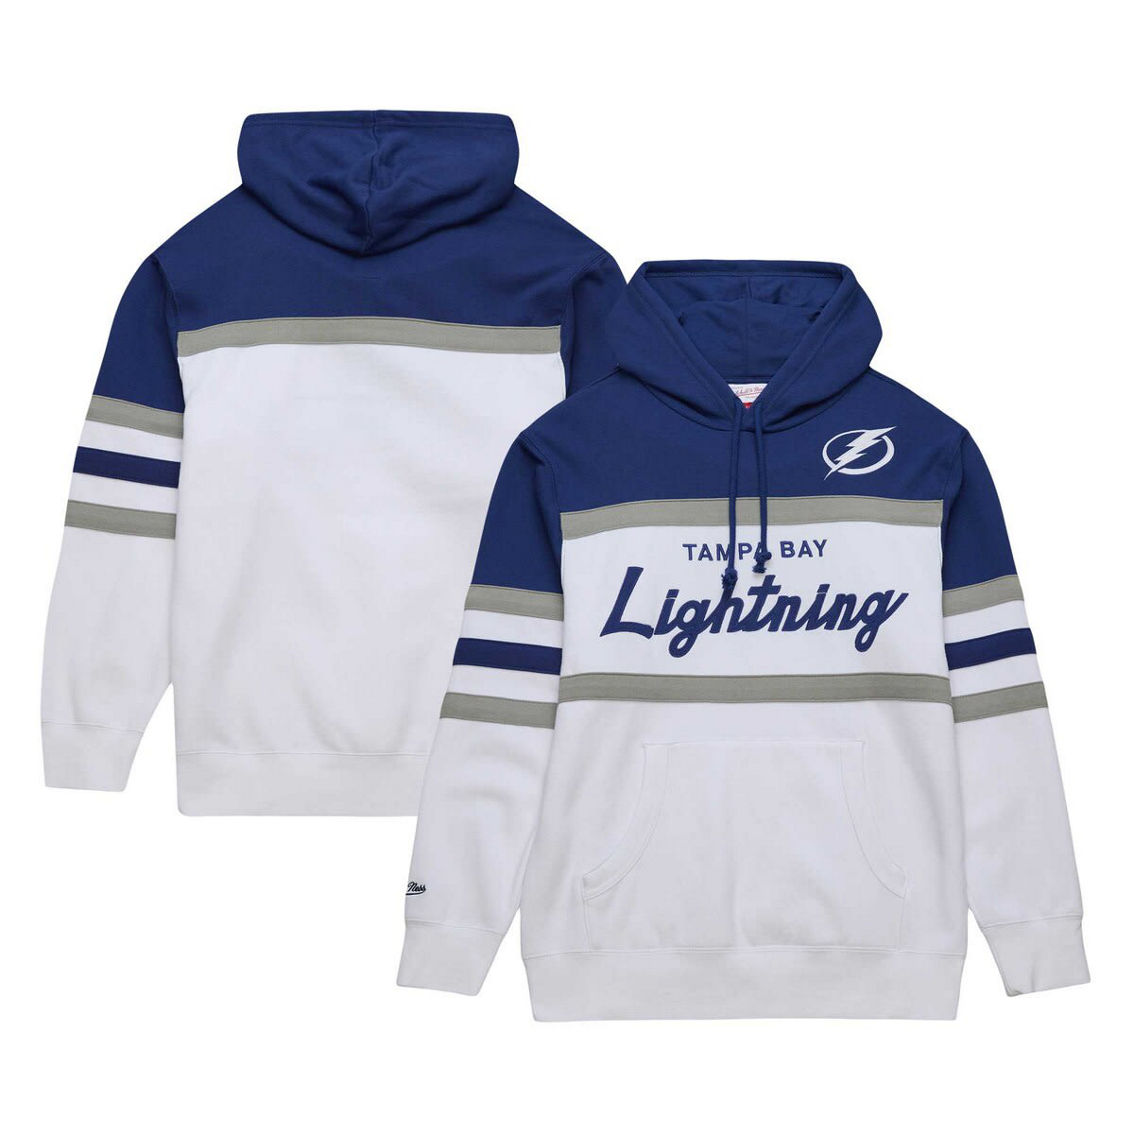 Mitchell & Ness Men's White/Blue Tampa Bay Lightning Head Coach Pullover Hoodie - Image 2 of 4